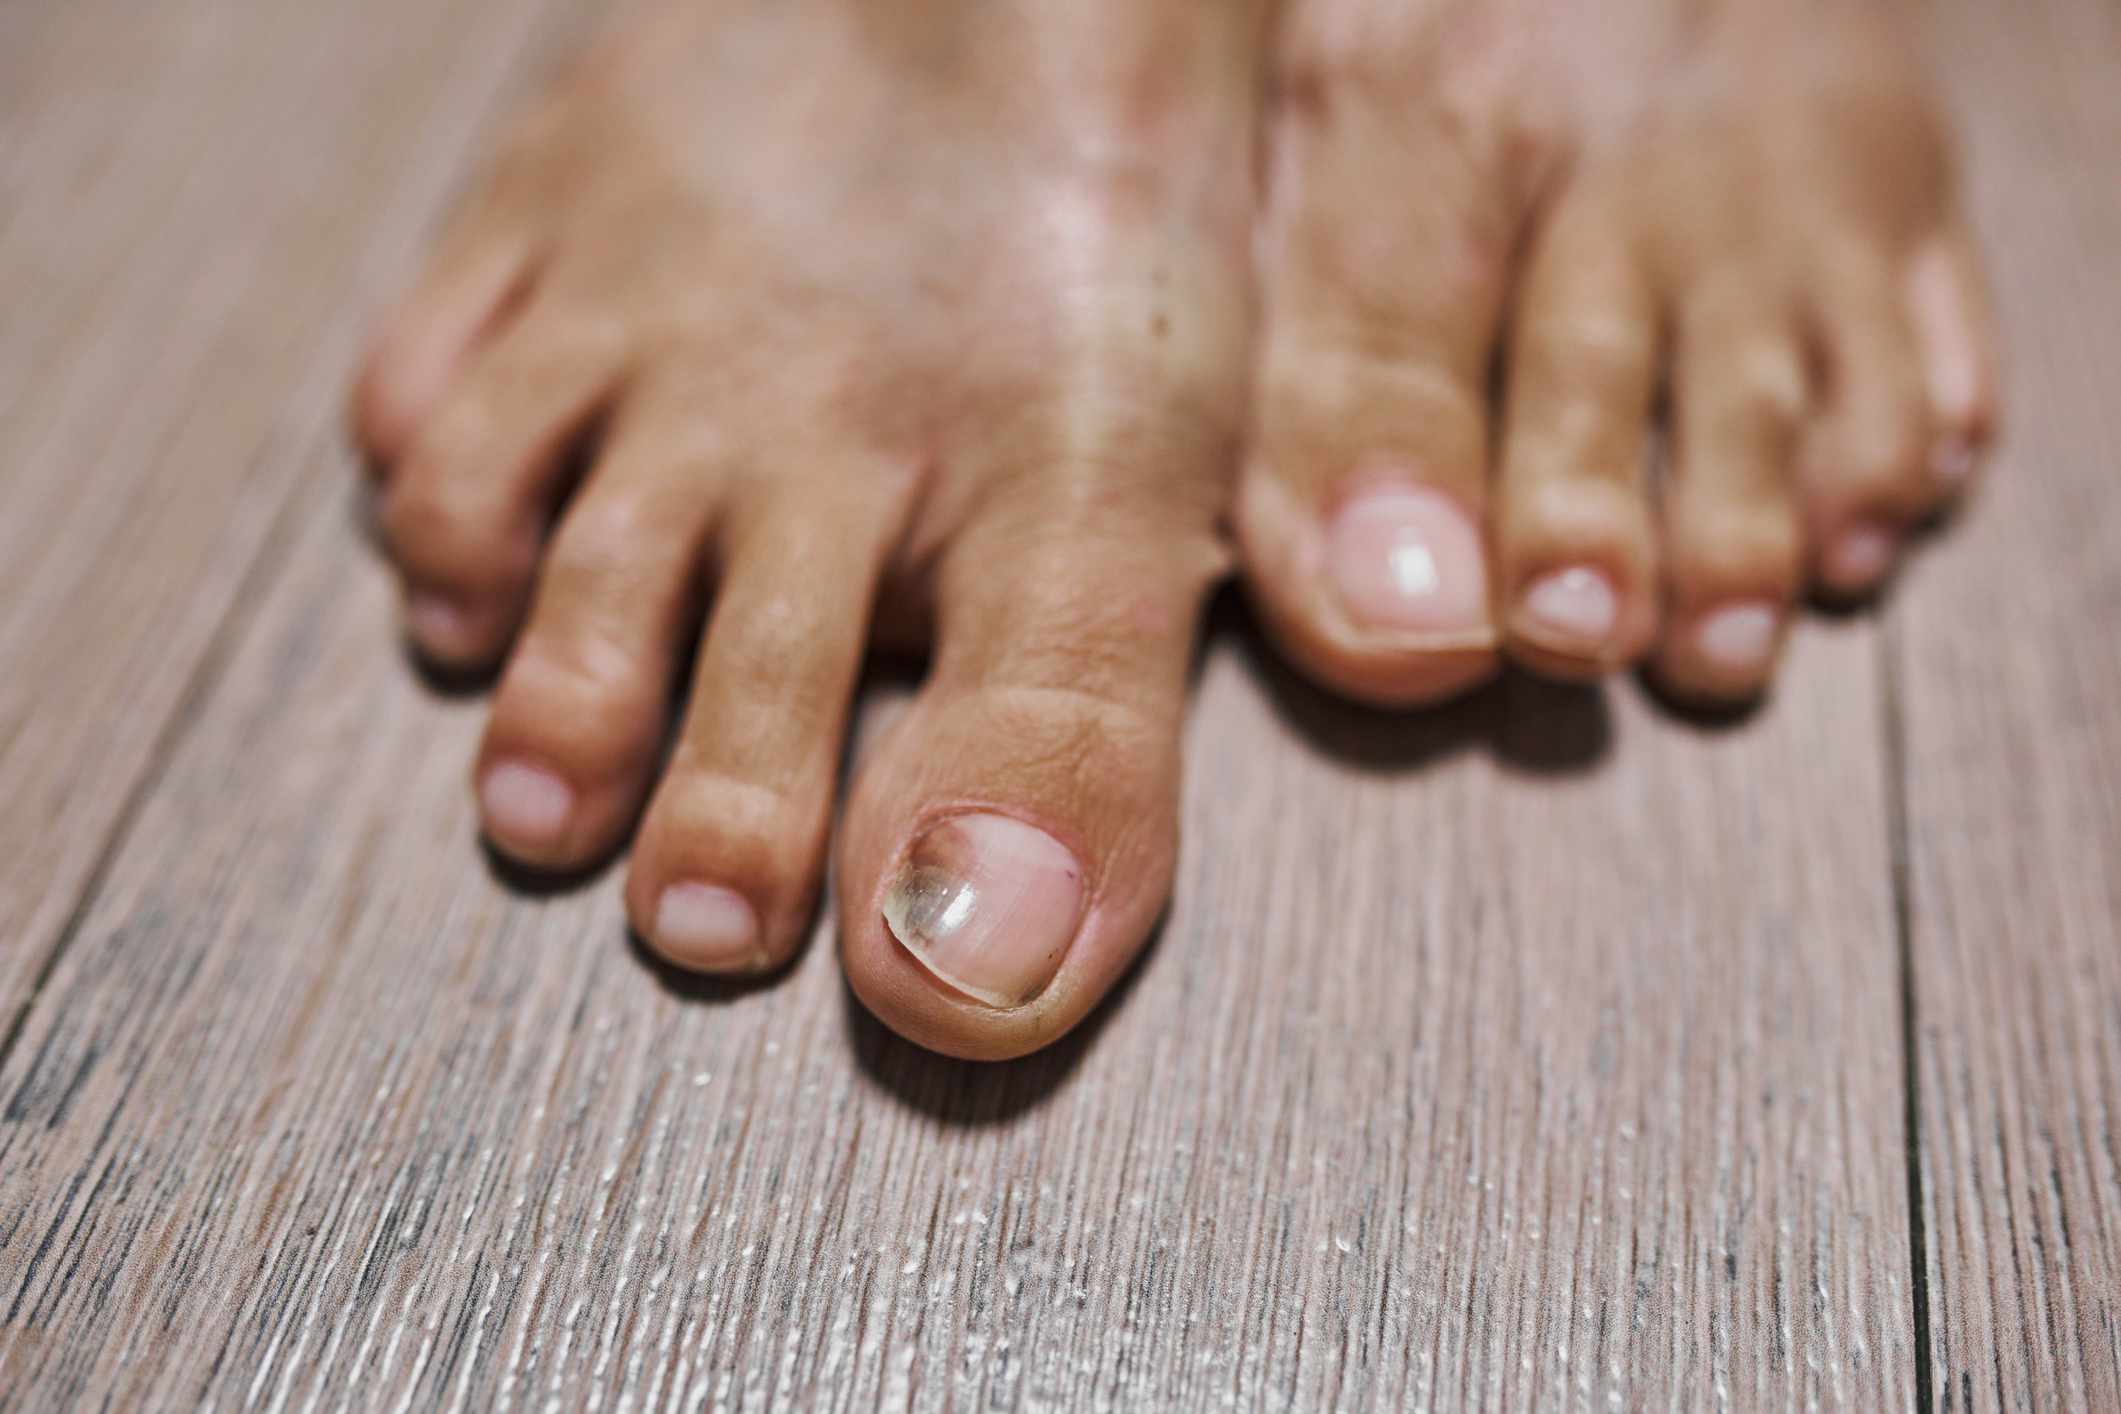 what is a bruised toenail?